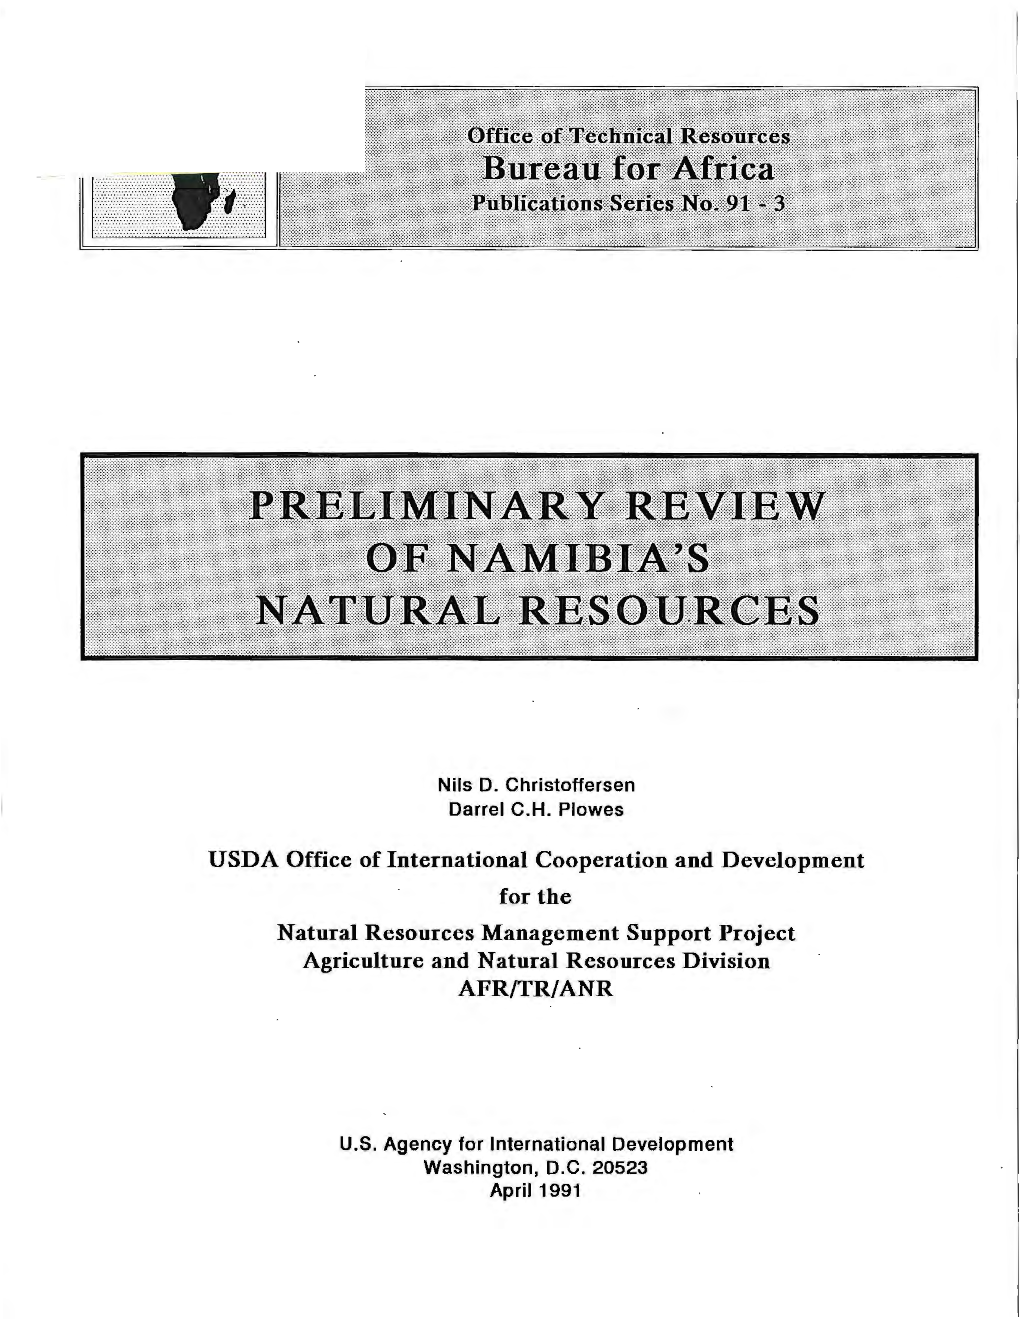 USDA Office of International Cooperation and Development for the Natural Resources Management Support Project Agriculture and Natural Resources Division AFR/TR/ANR